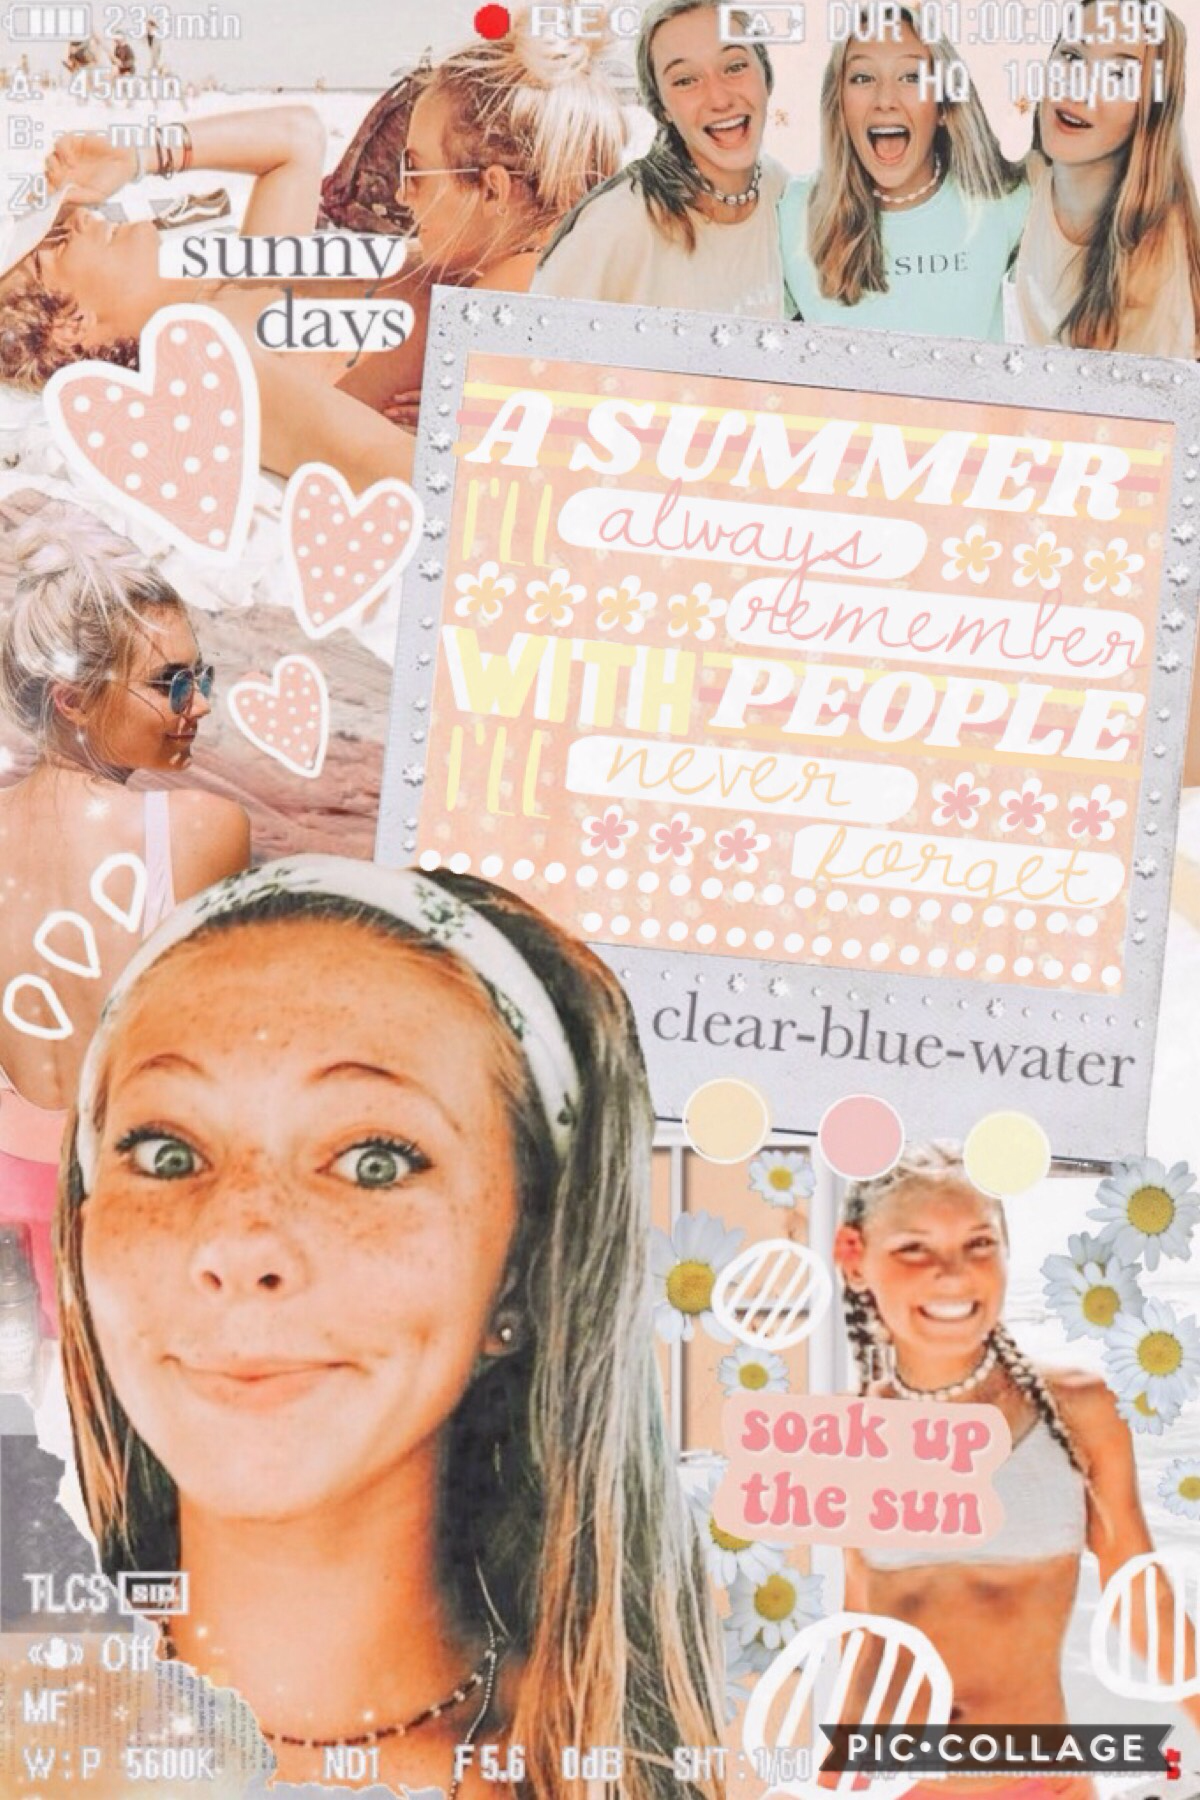 🌤T A P🌤
This is the followers control my collage! Hope you guys like it. Summer is officially over for me bc school started for me so I will be less active.
QOTD: What is your favorite weekend activity?
AOTD: Hanging out with friends 